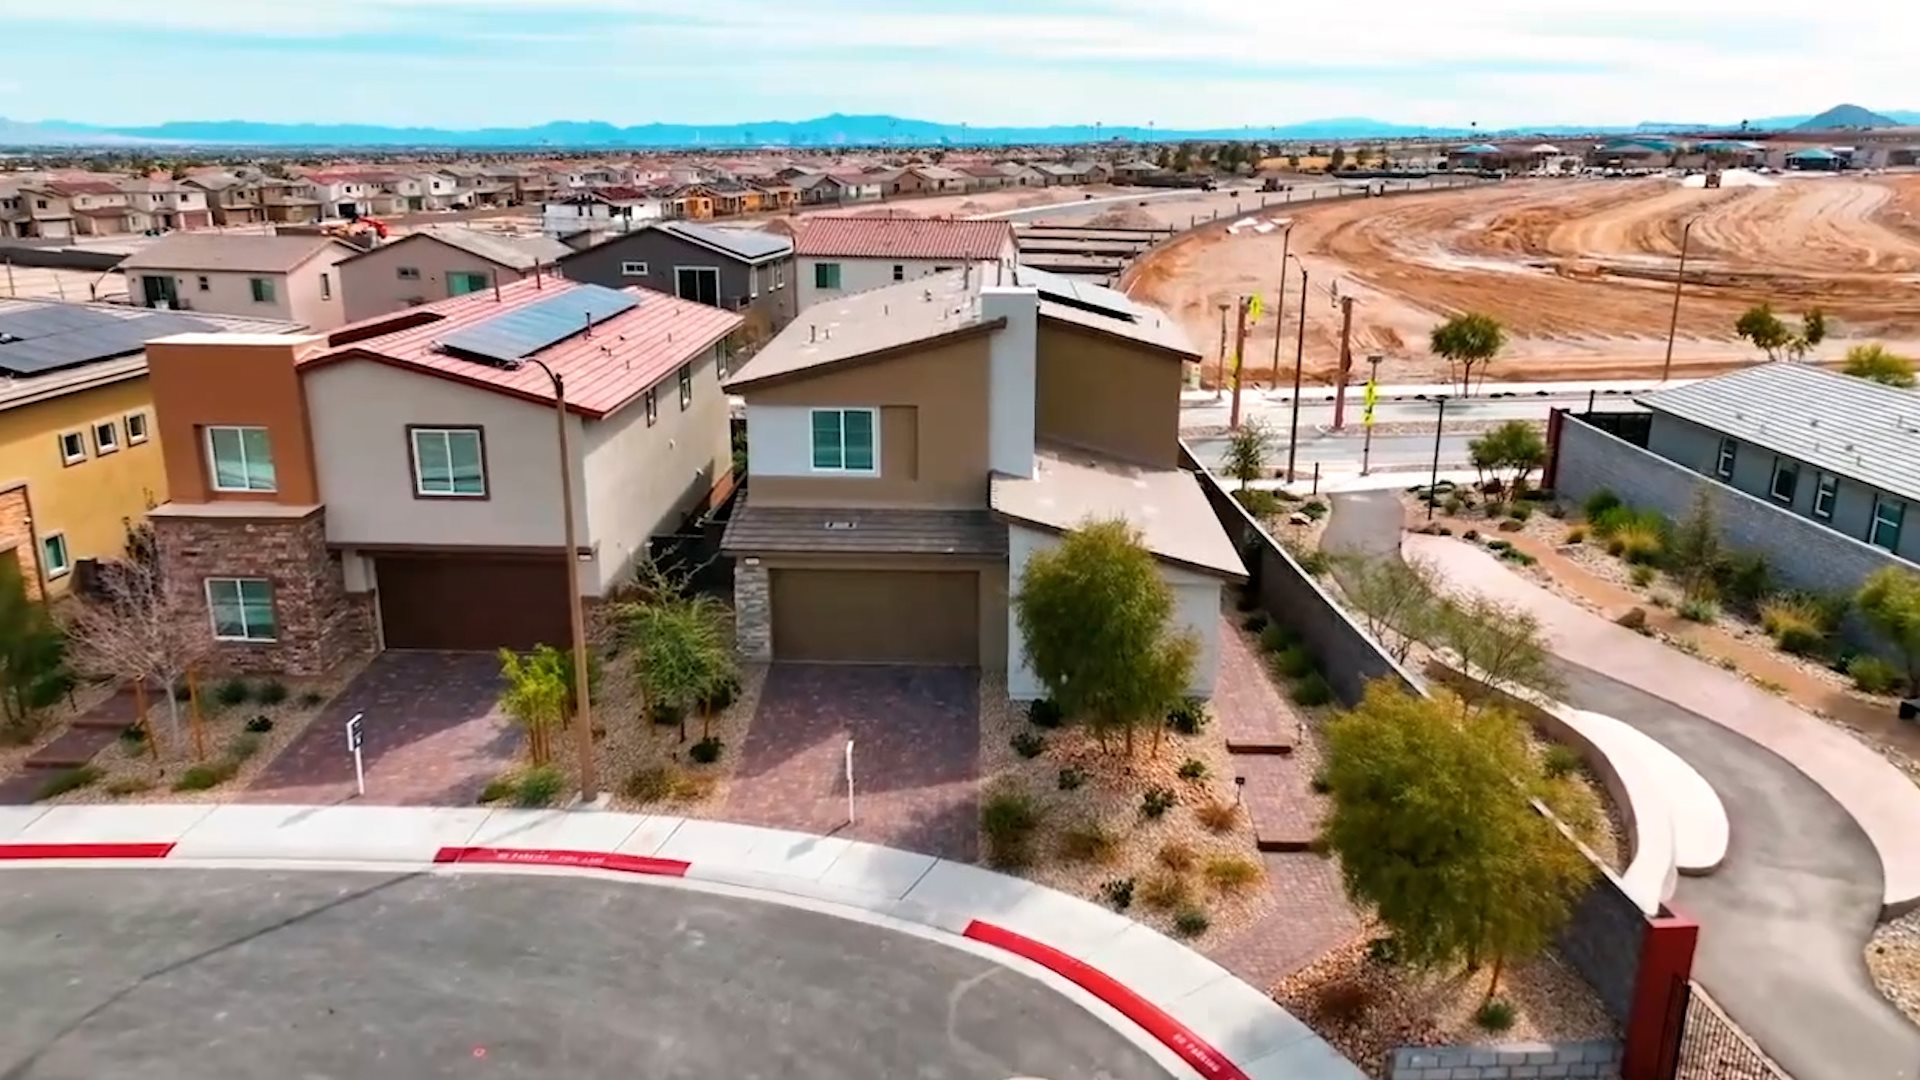 How To Build A Home For Your Future Needs, Las Vegas, NV